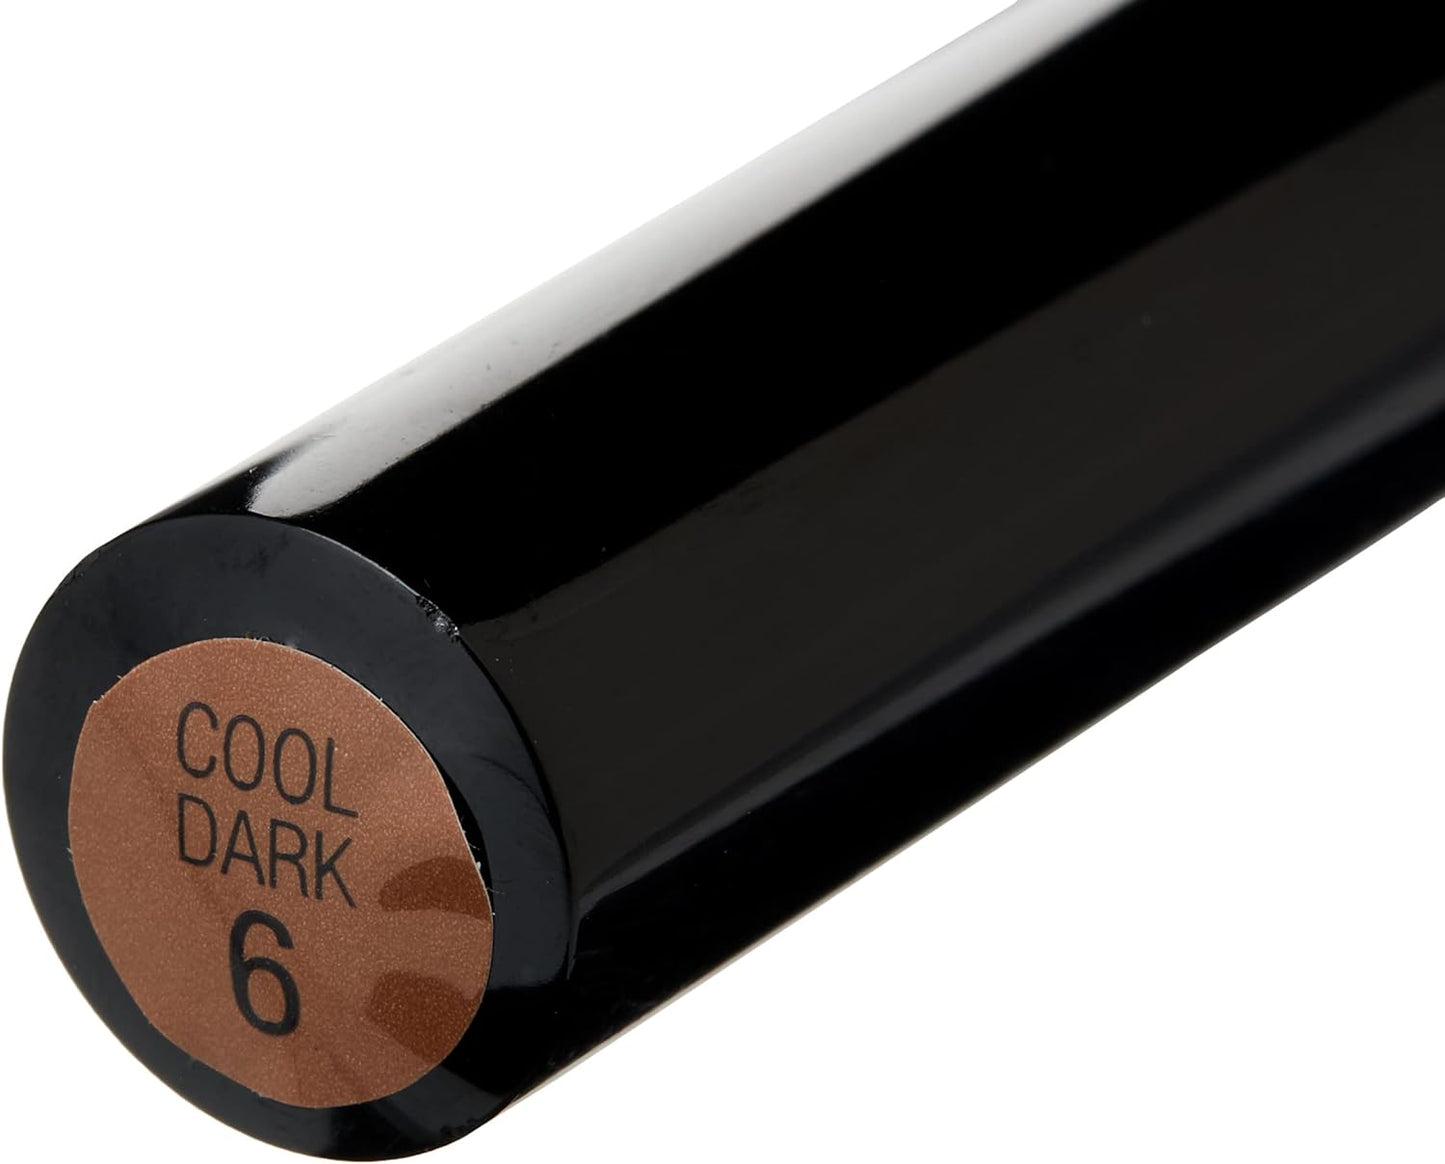 Lasting Perfection Concealer, Cool Dark by Colletion, a UK Brand